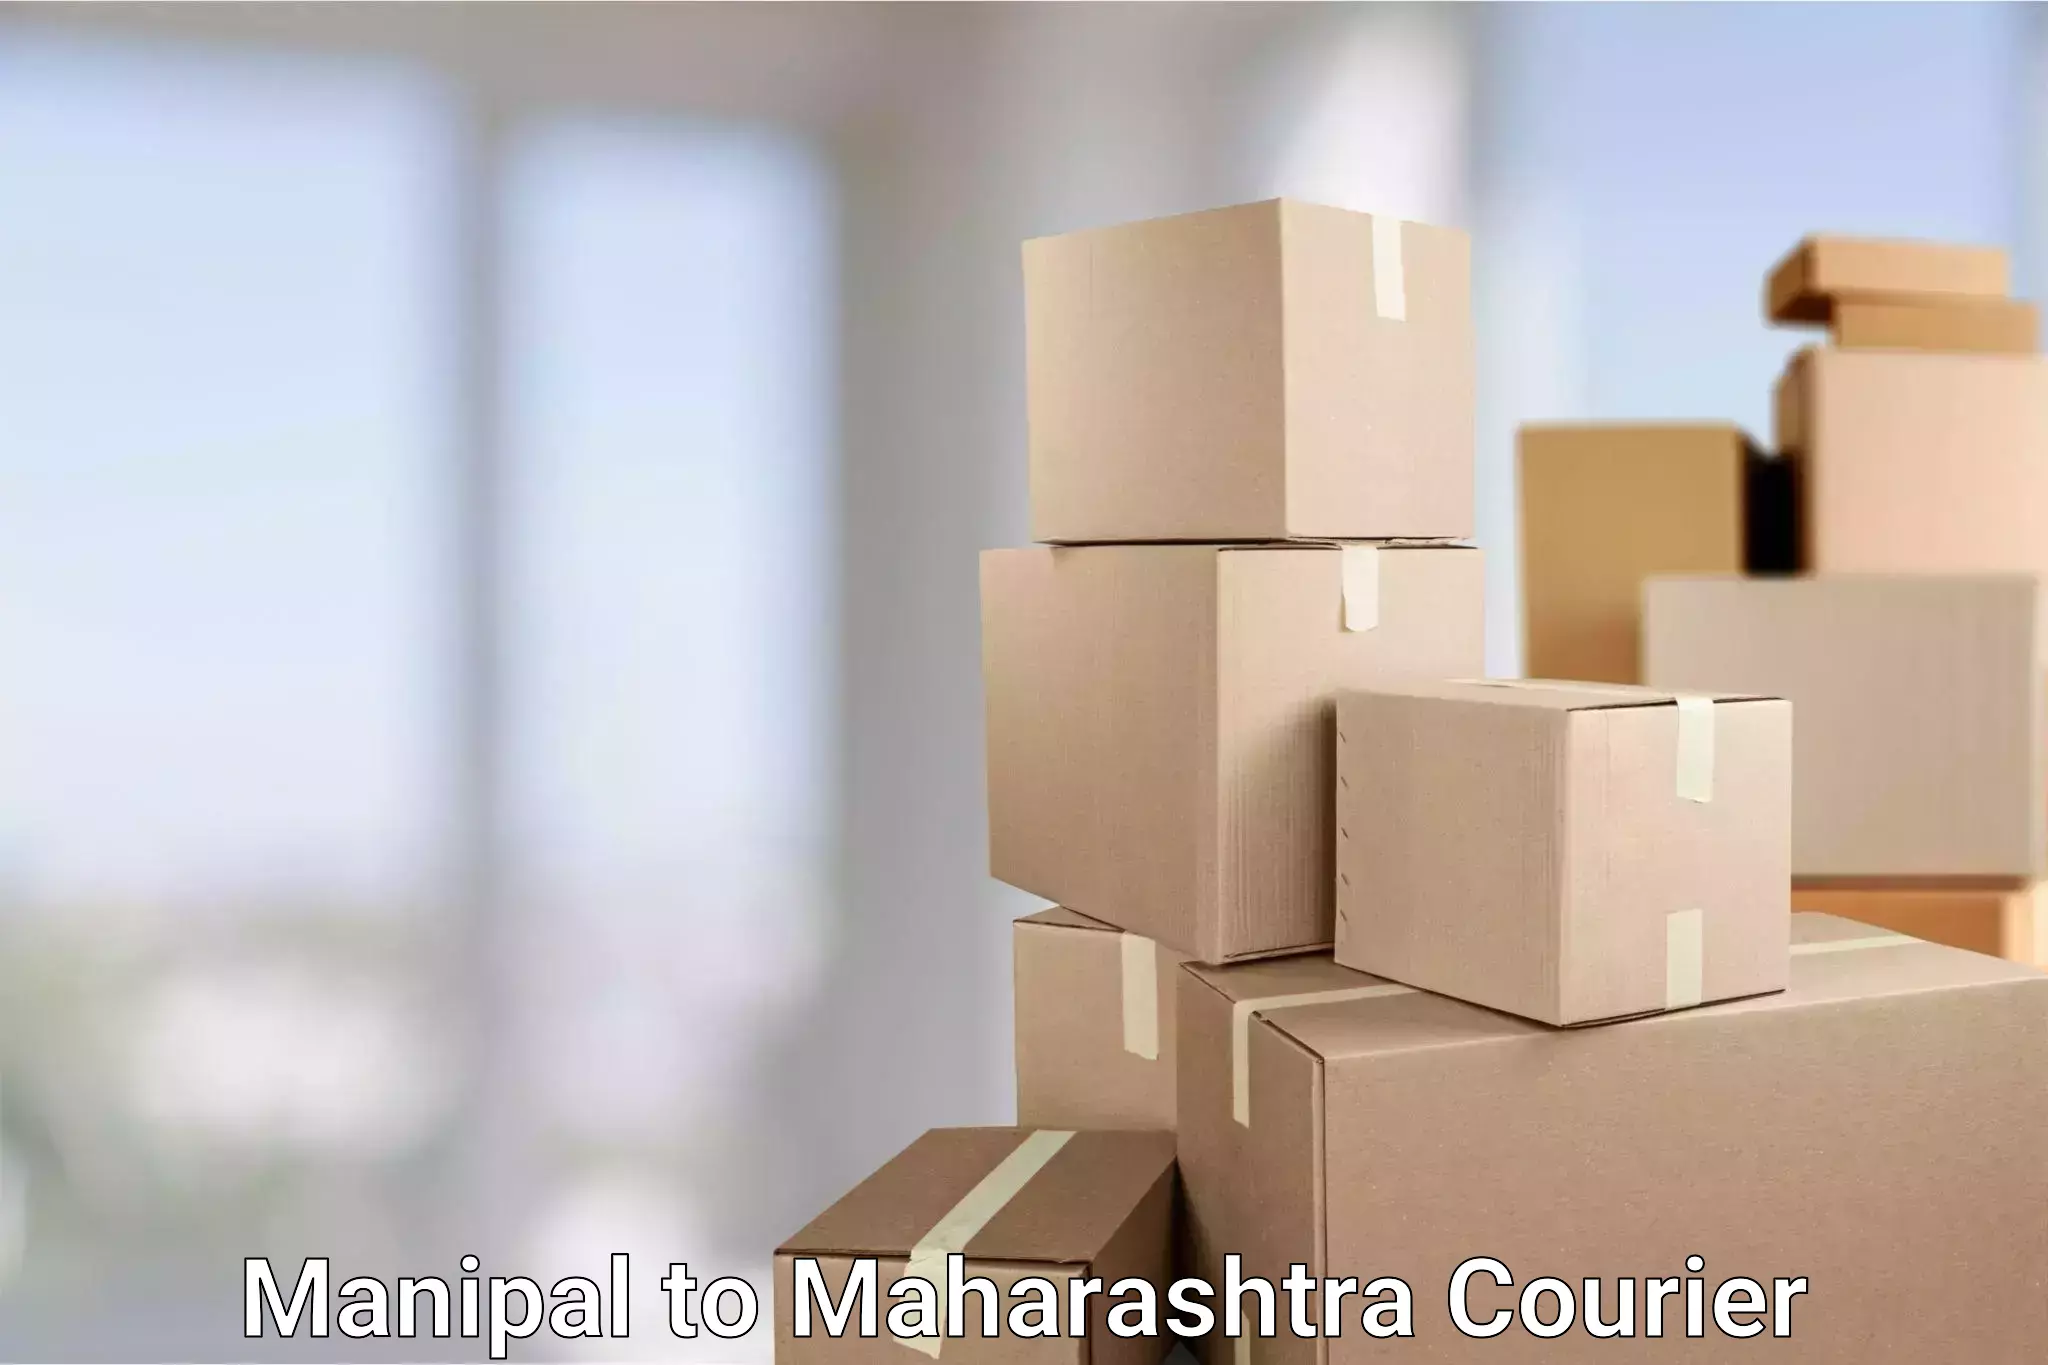 On-call courier service Manipal to Kannad